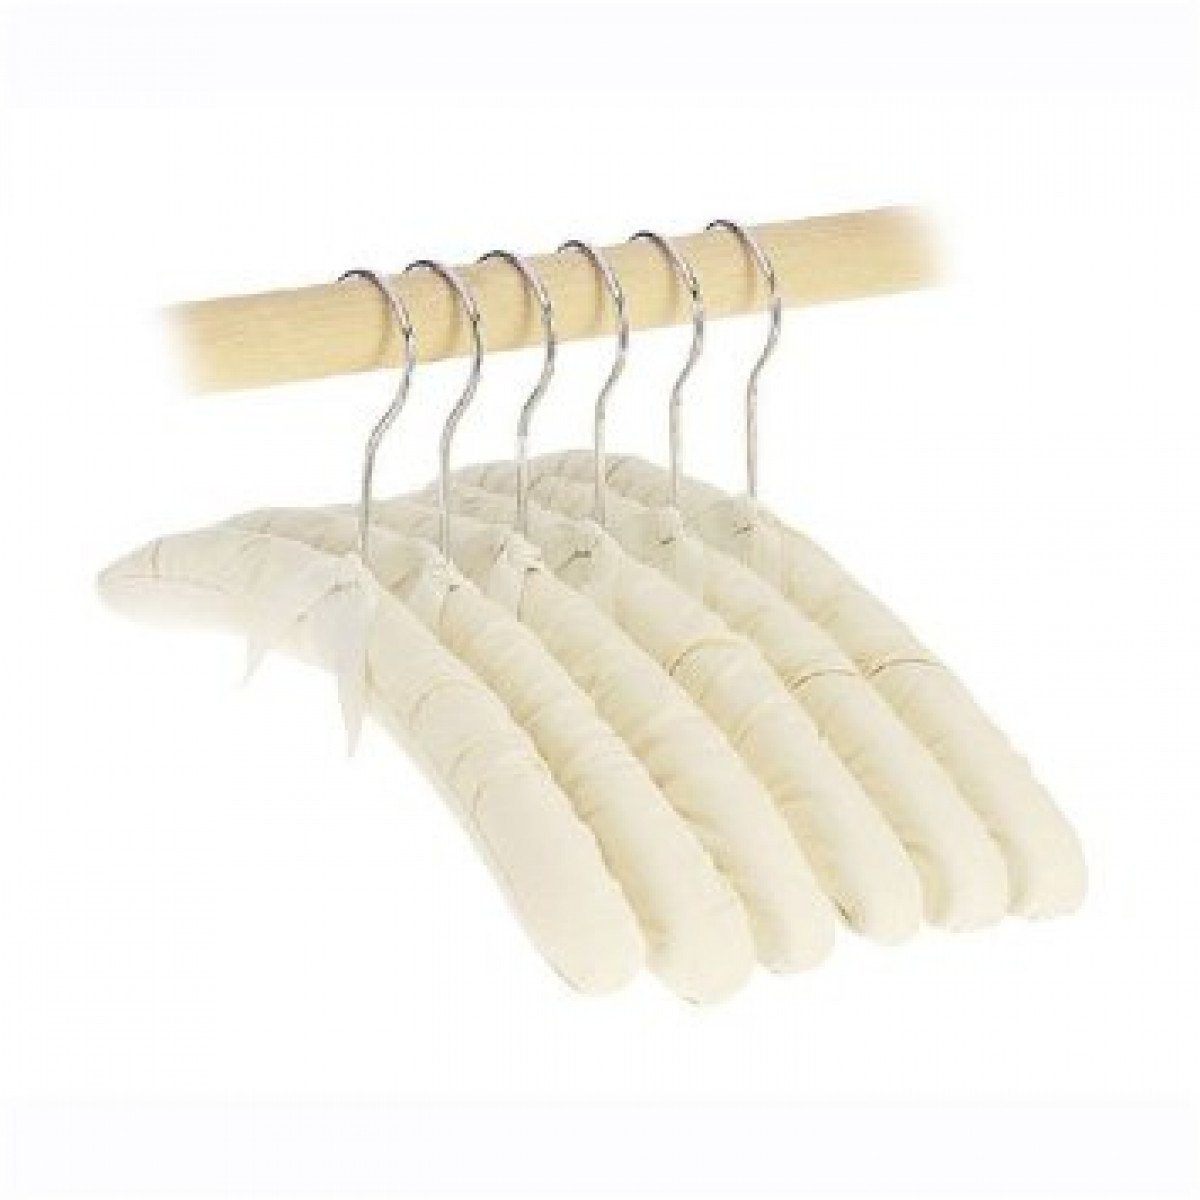 Set of 6 Whitmor 6139-47-C Canvas Padded Hanger Collection Shirt/Blouse Hangers